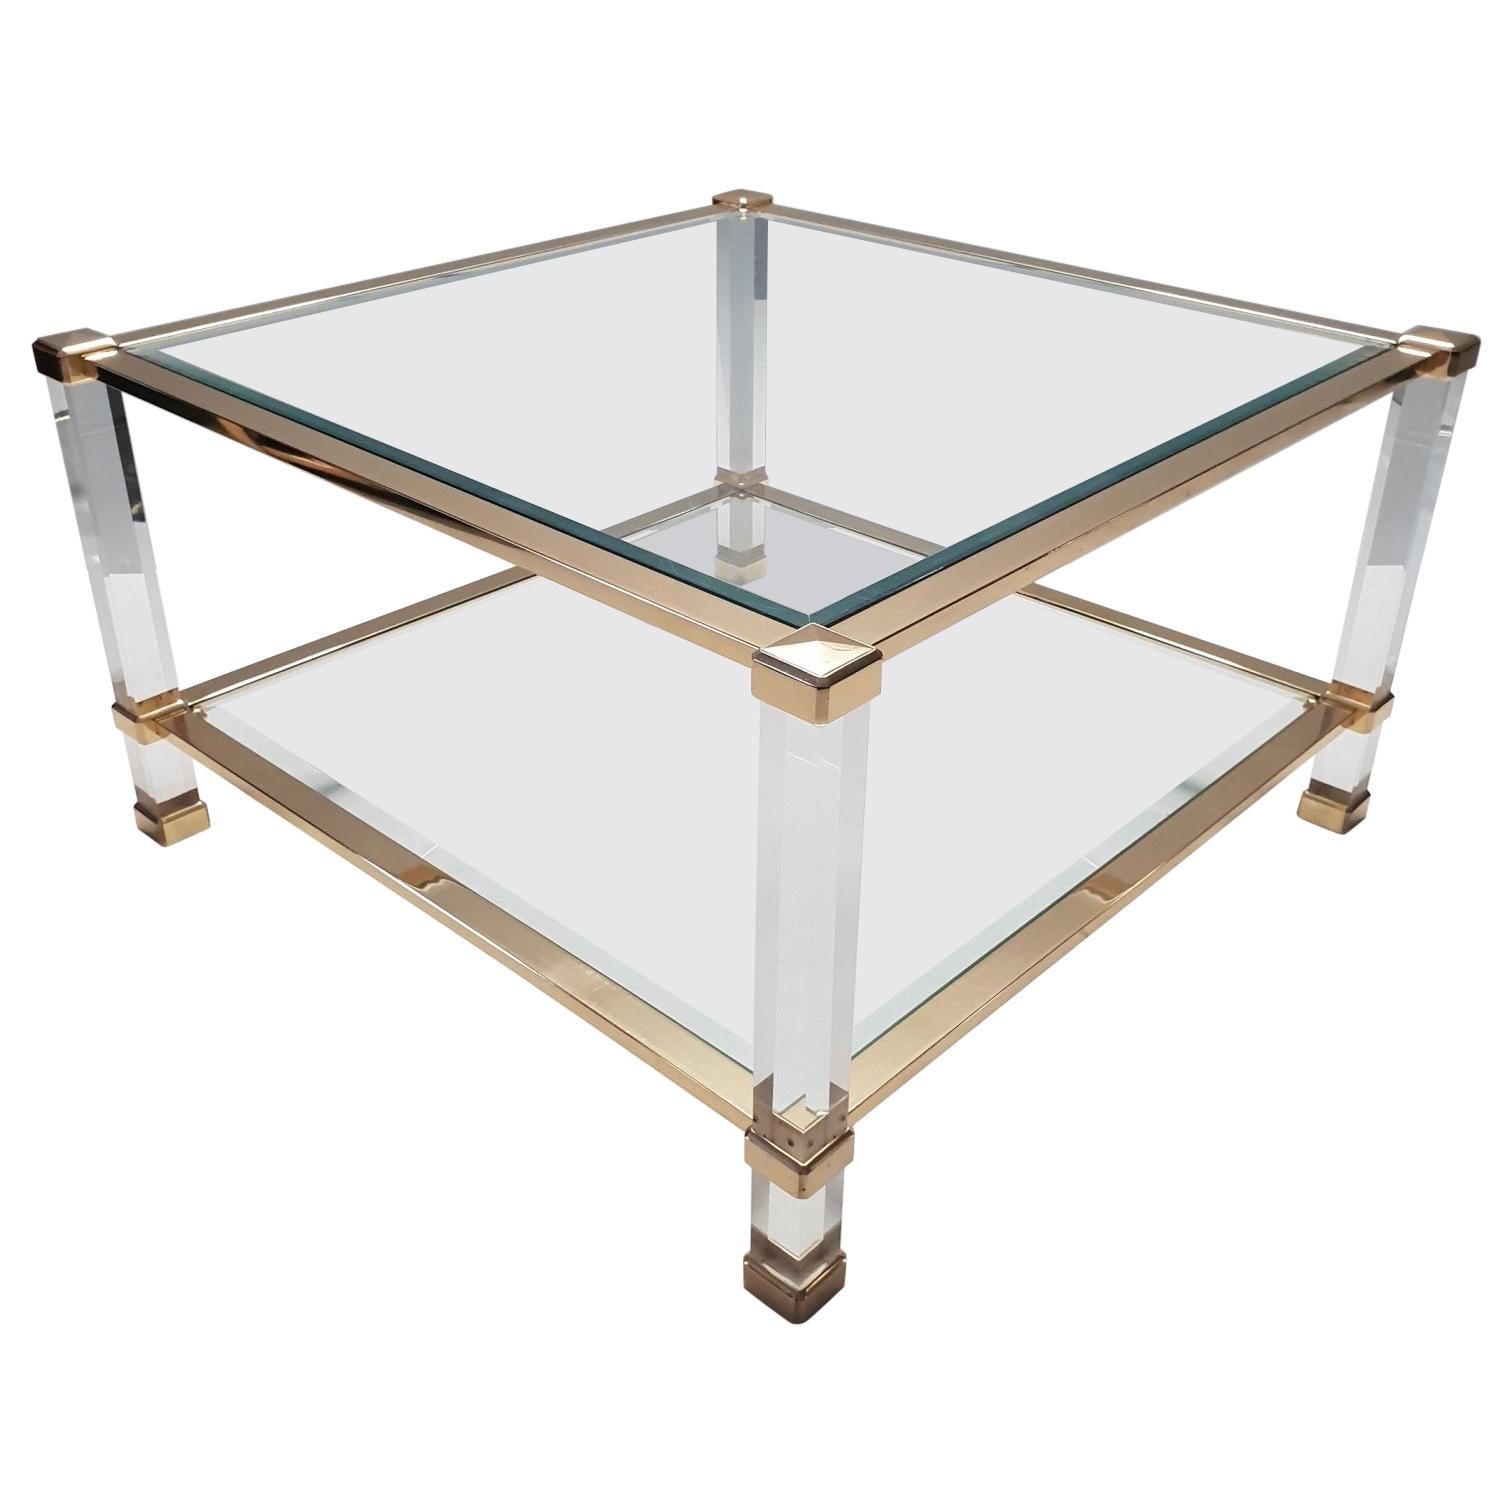 Italian Lucite and Brass Square Coffee Table by Orsenigo 'Marked', 1970s